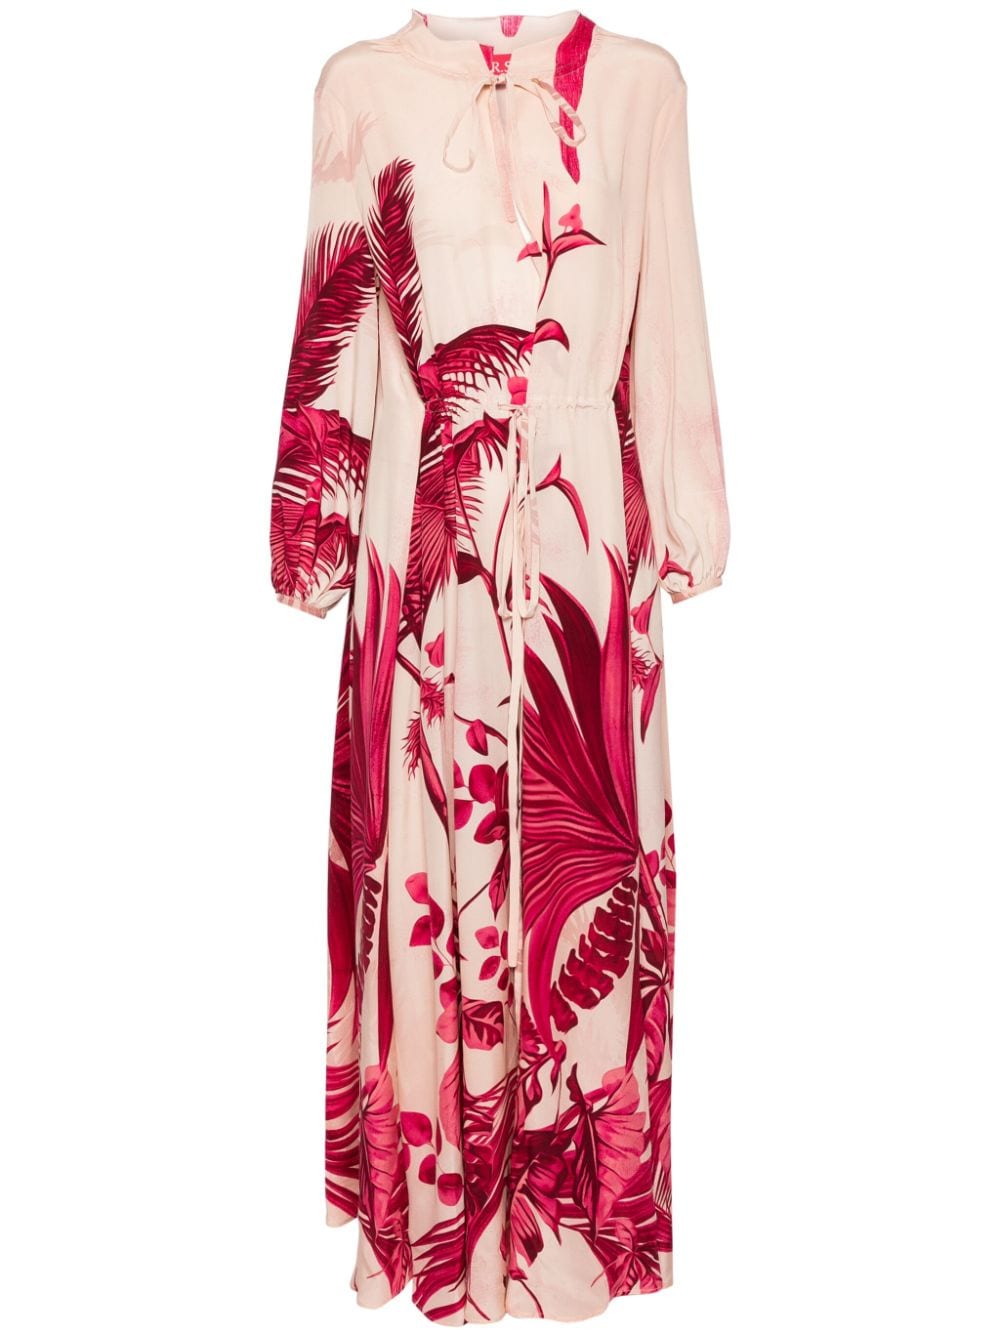 F.R.S For Restless Sleepers Eione floral-print maxi dress